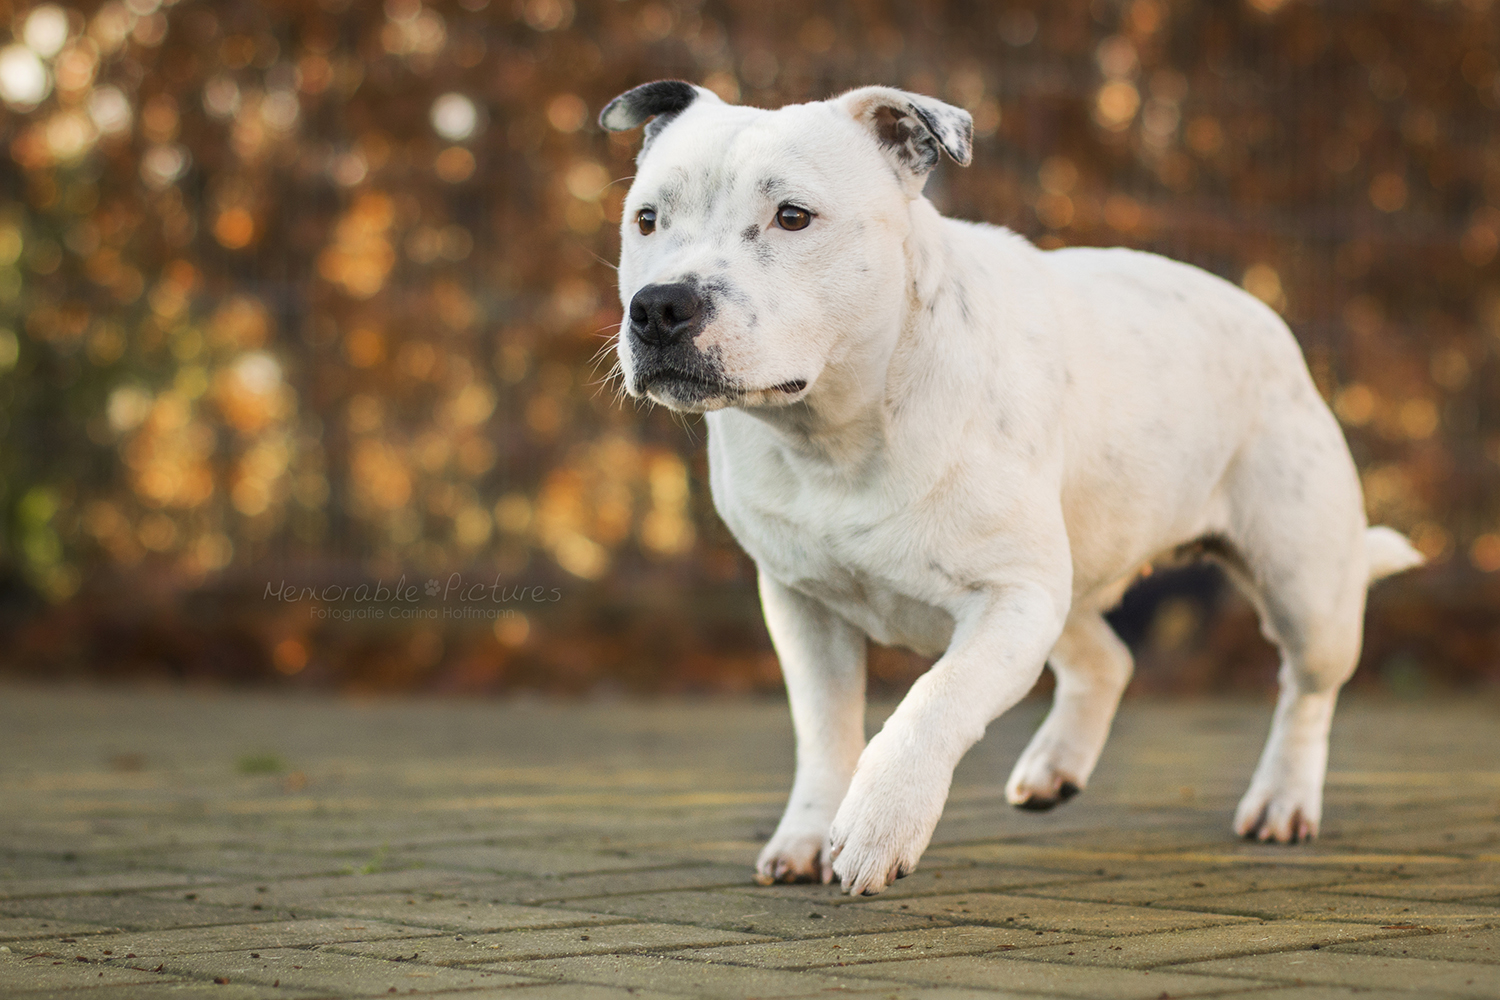 11 Best Raw Dog Food Brands for Staffordshire Bull Terriers